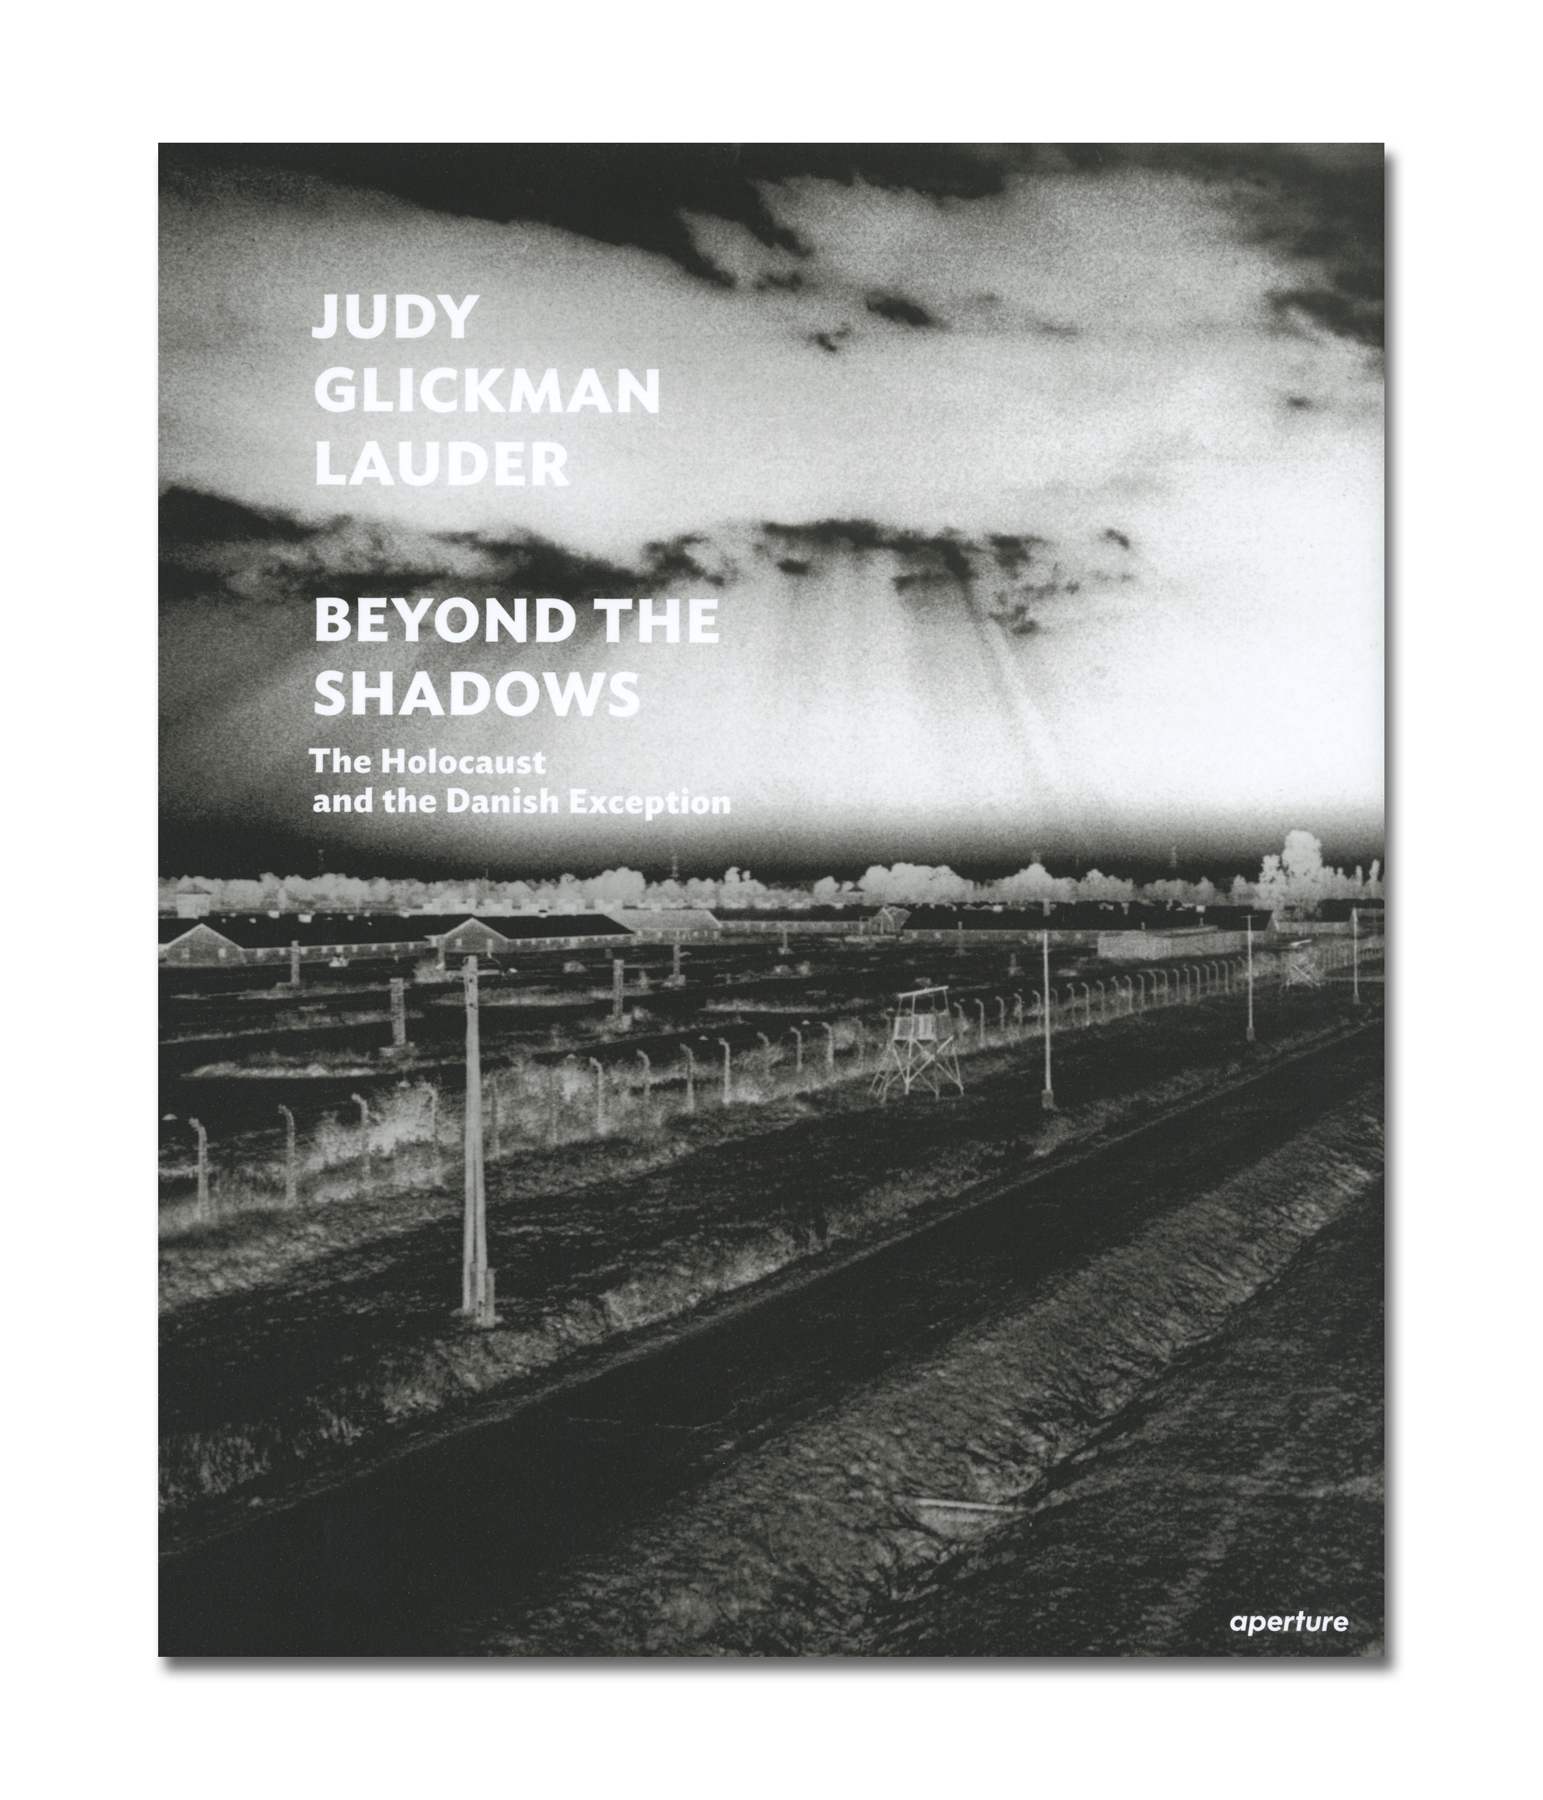 Conversation and Book Signing with Judy Glickman Lauder